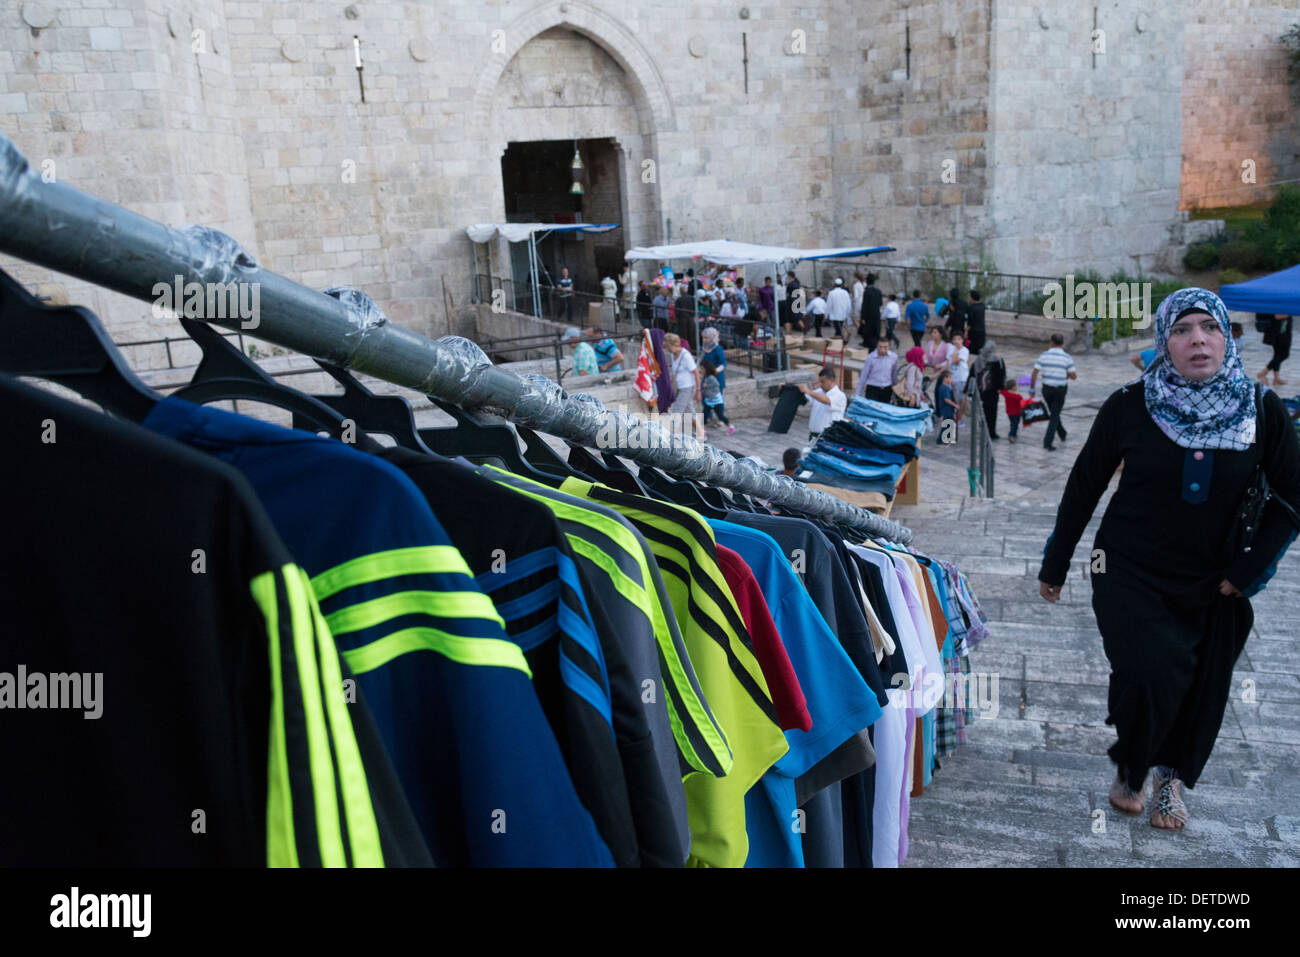 Palestinian woman at Damascus gate with T shirts for sale. Jerusalem Old City. Israel. Stock Photo